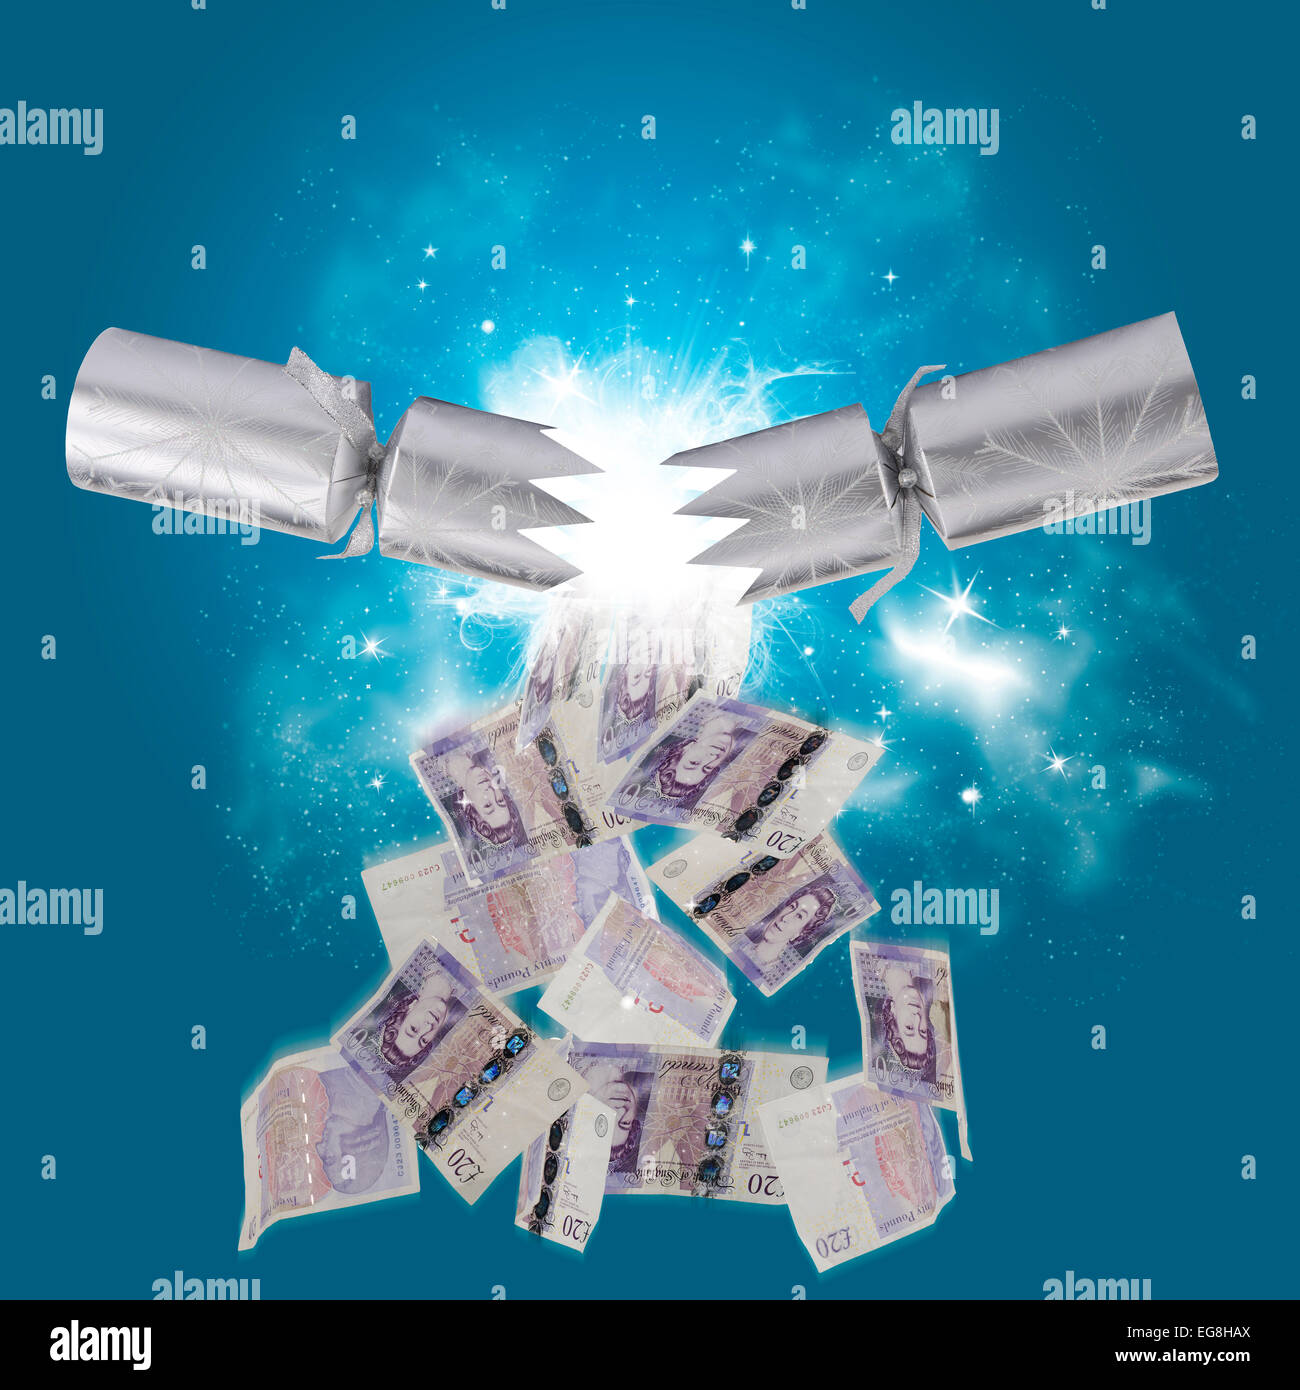 concept image of money falling from a Christmas cracker Stock Photo